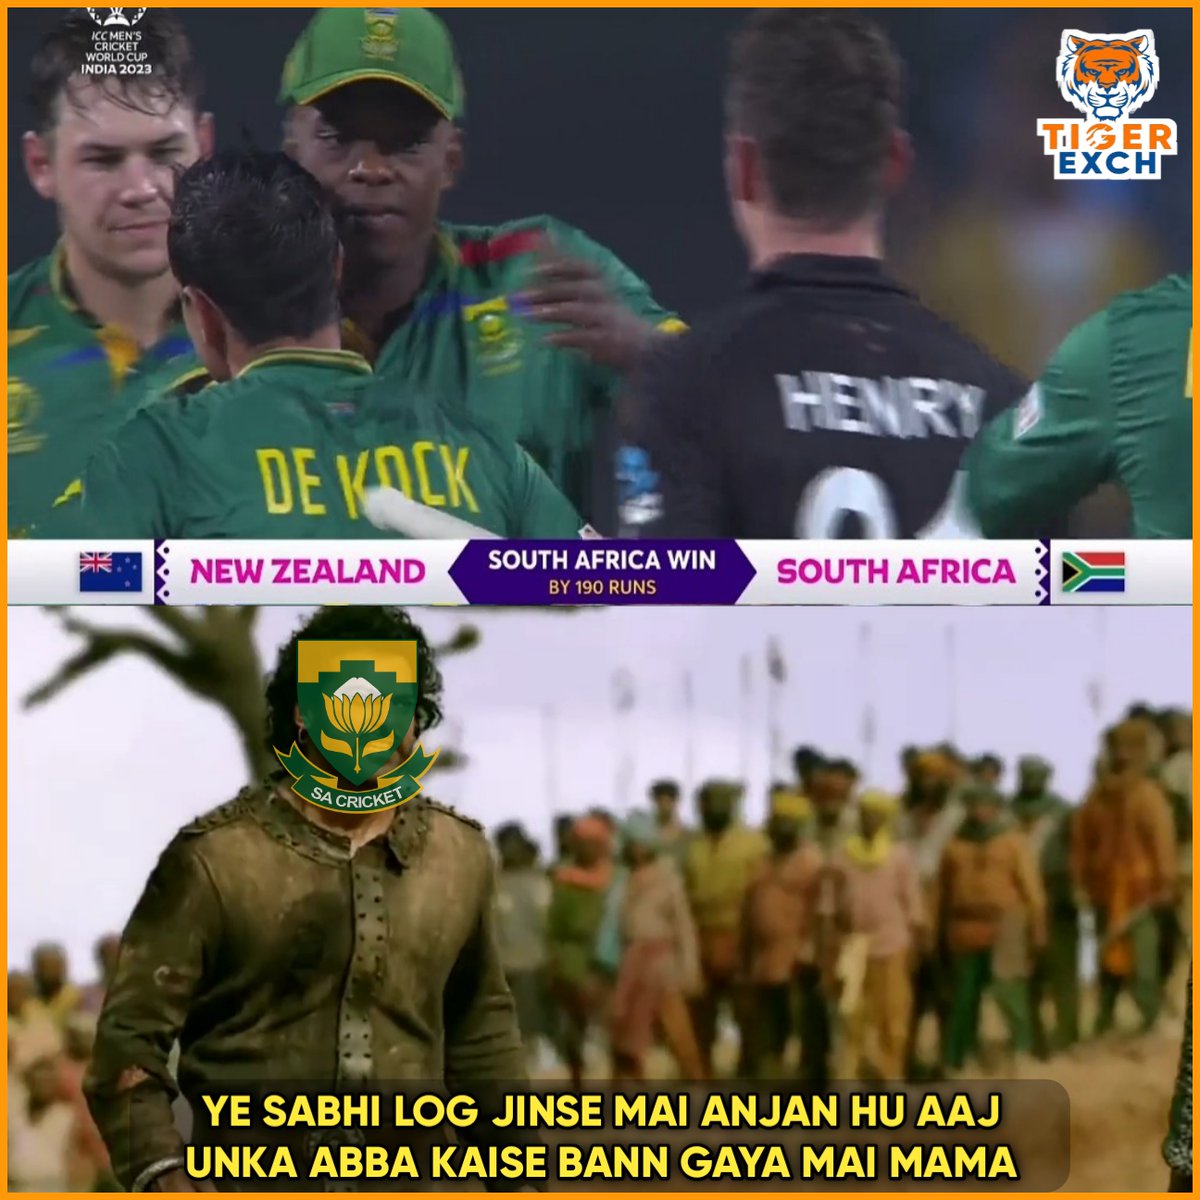 Pakistan fans must be delighted after South Africa's win. #cwc23 #NZvSA #SouthAfrica #Tiger3